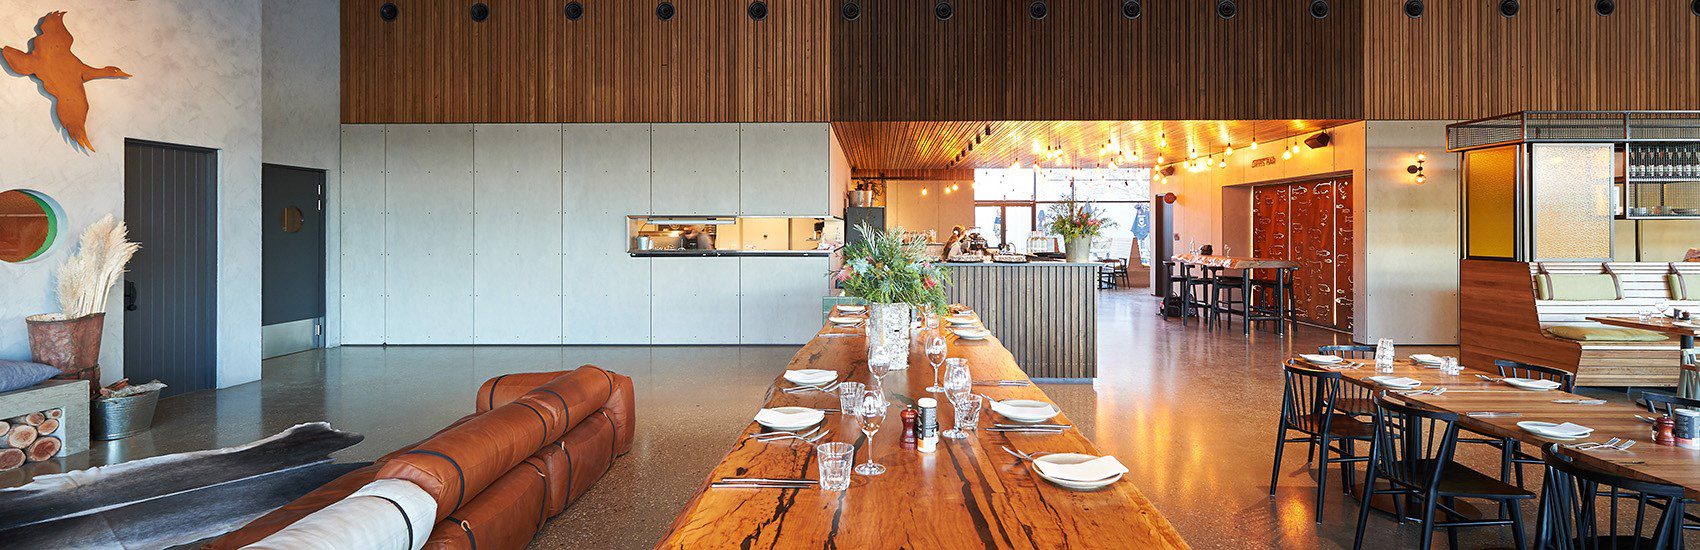 Raw and refined design transforms restaurant